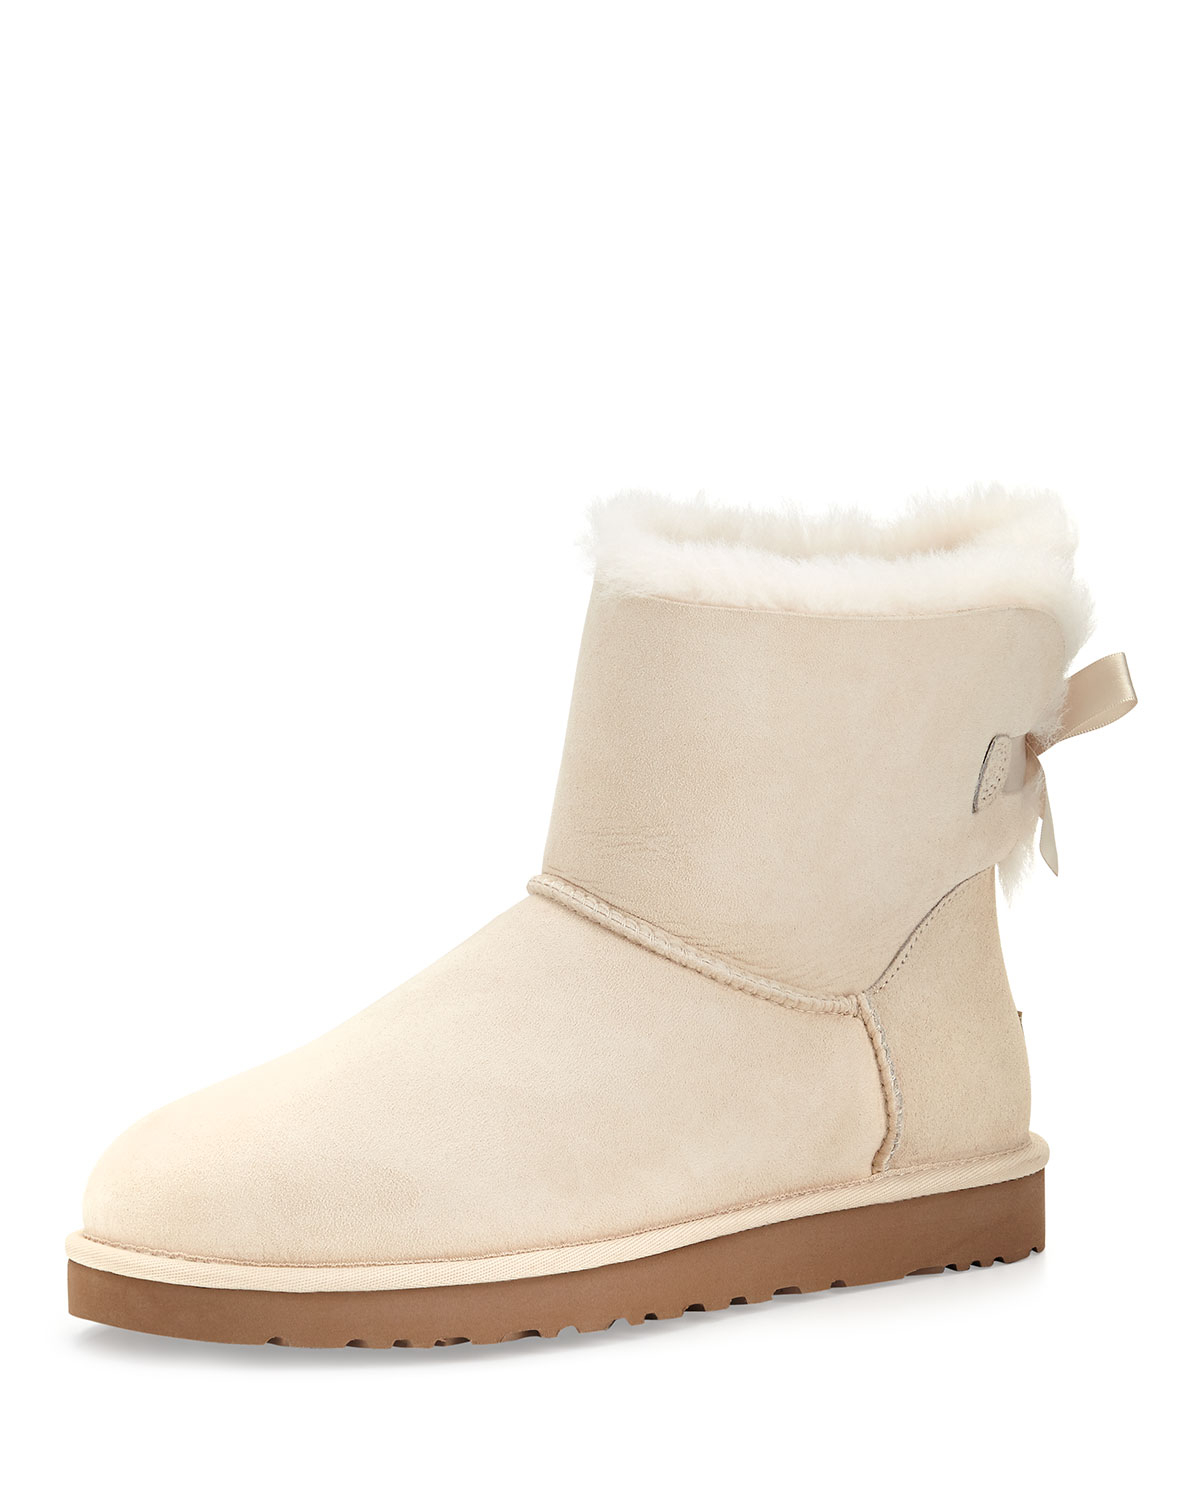 off white ugg boots 